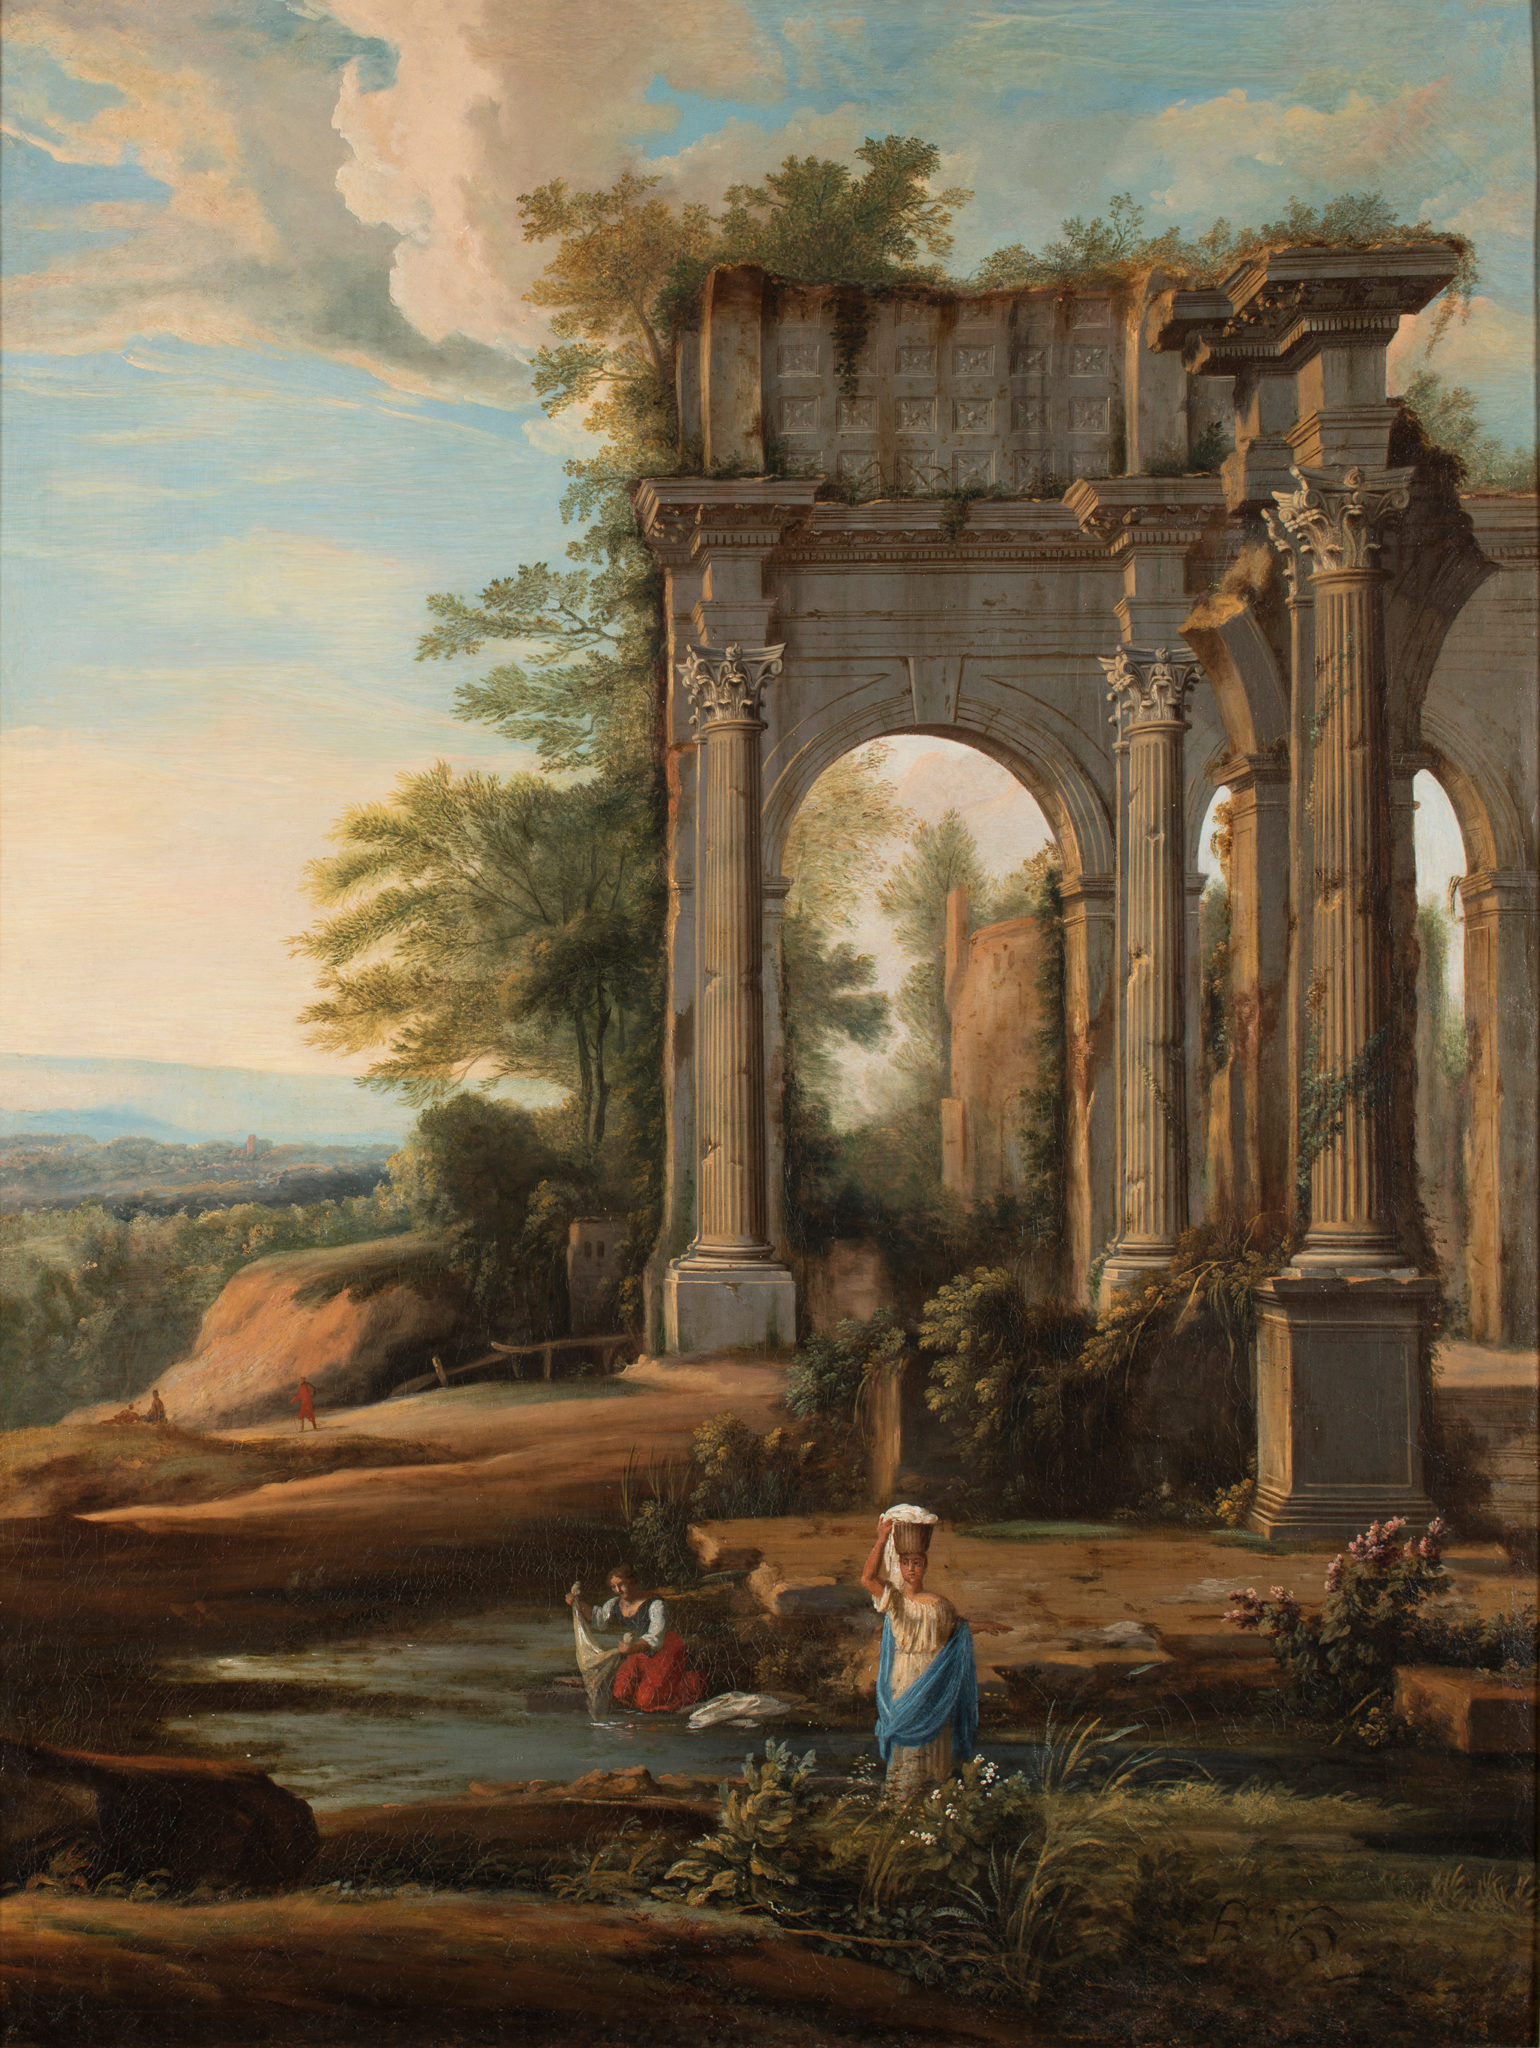 Landscape painting of Greek architectural ruins overgrown with foliage. Two women in the foreground wash clothes in a river.